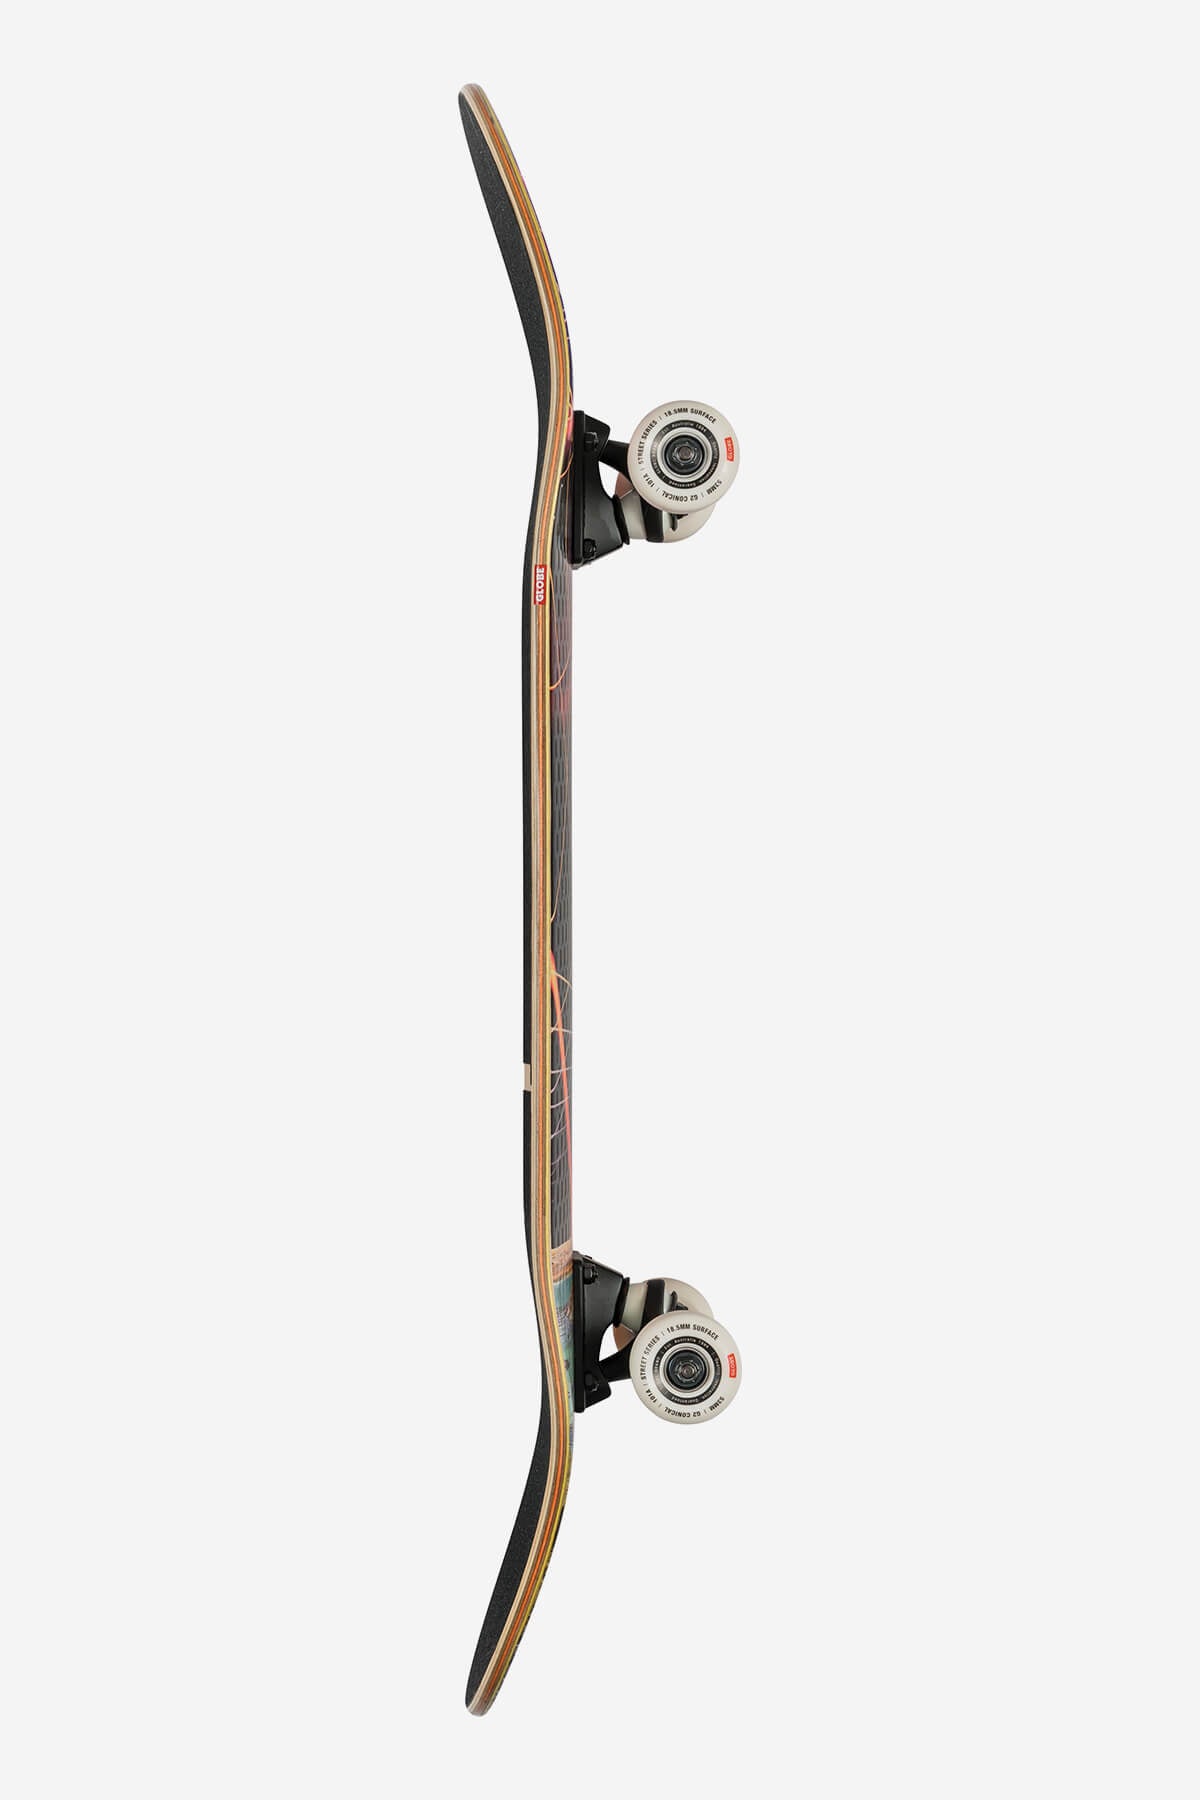 Globe - G2 Rapid Space - Asteroid - 8,25" Completo Skateboard